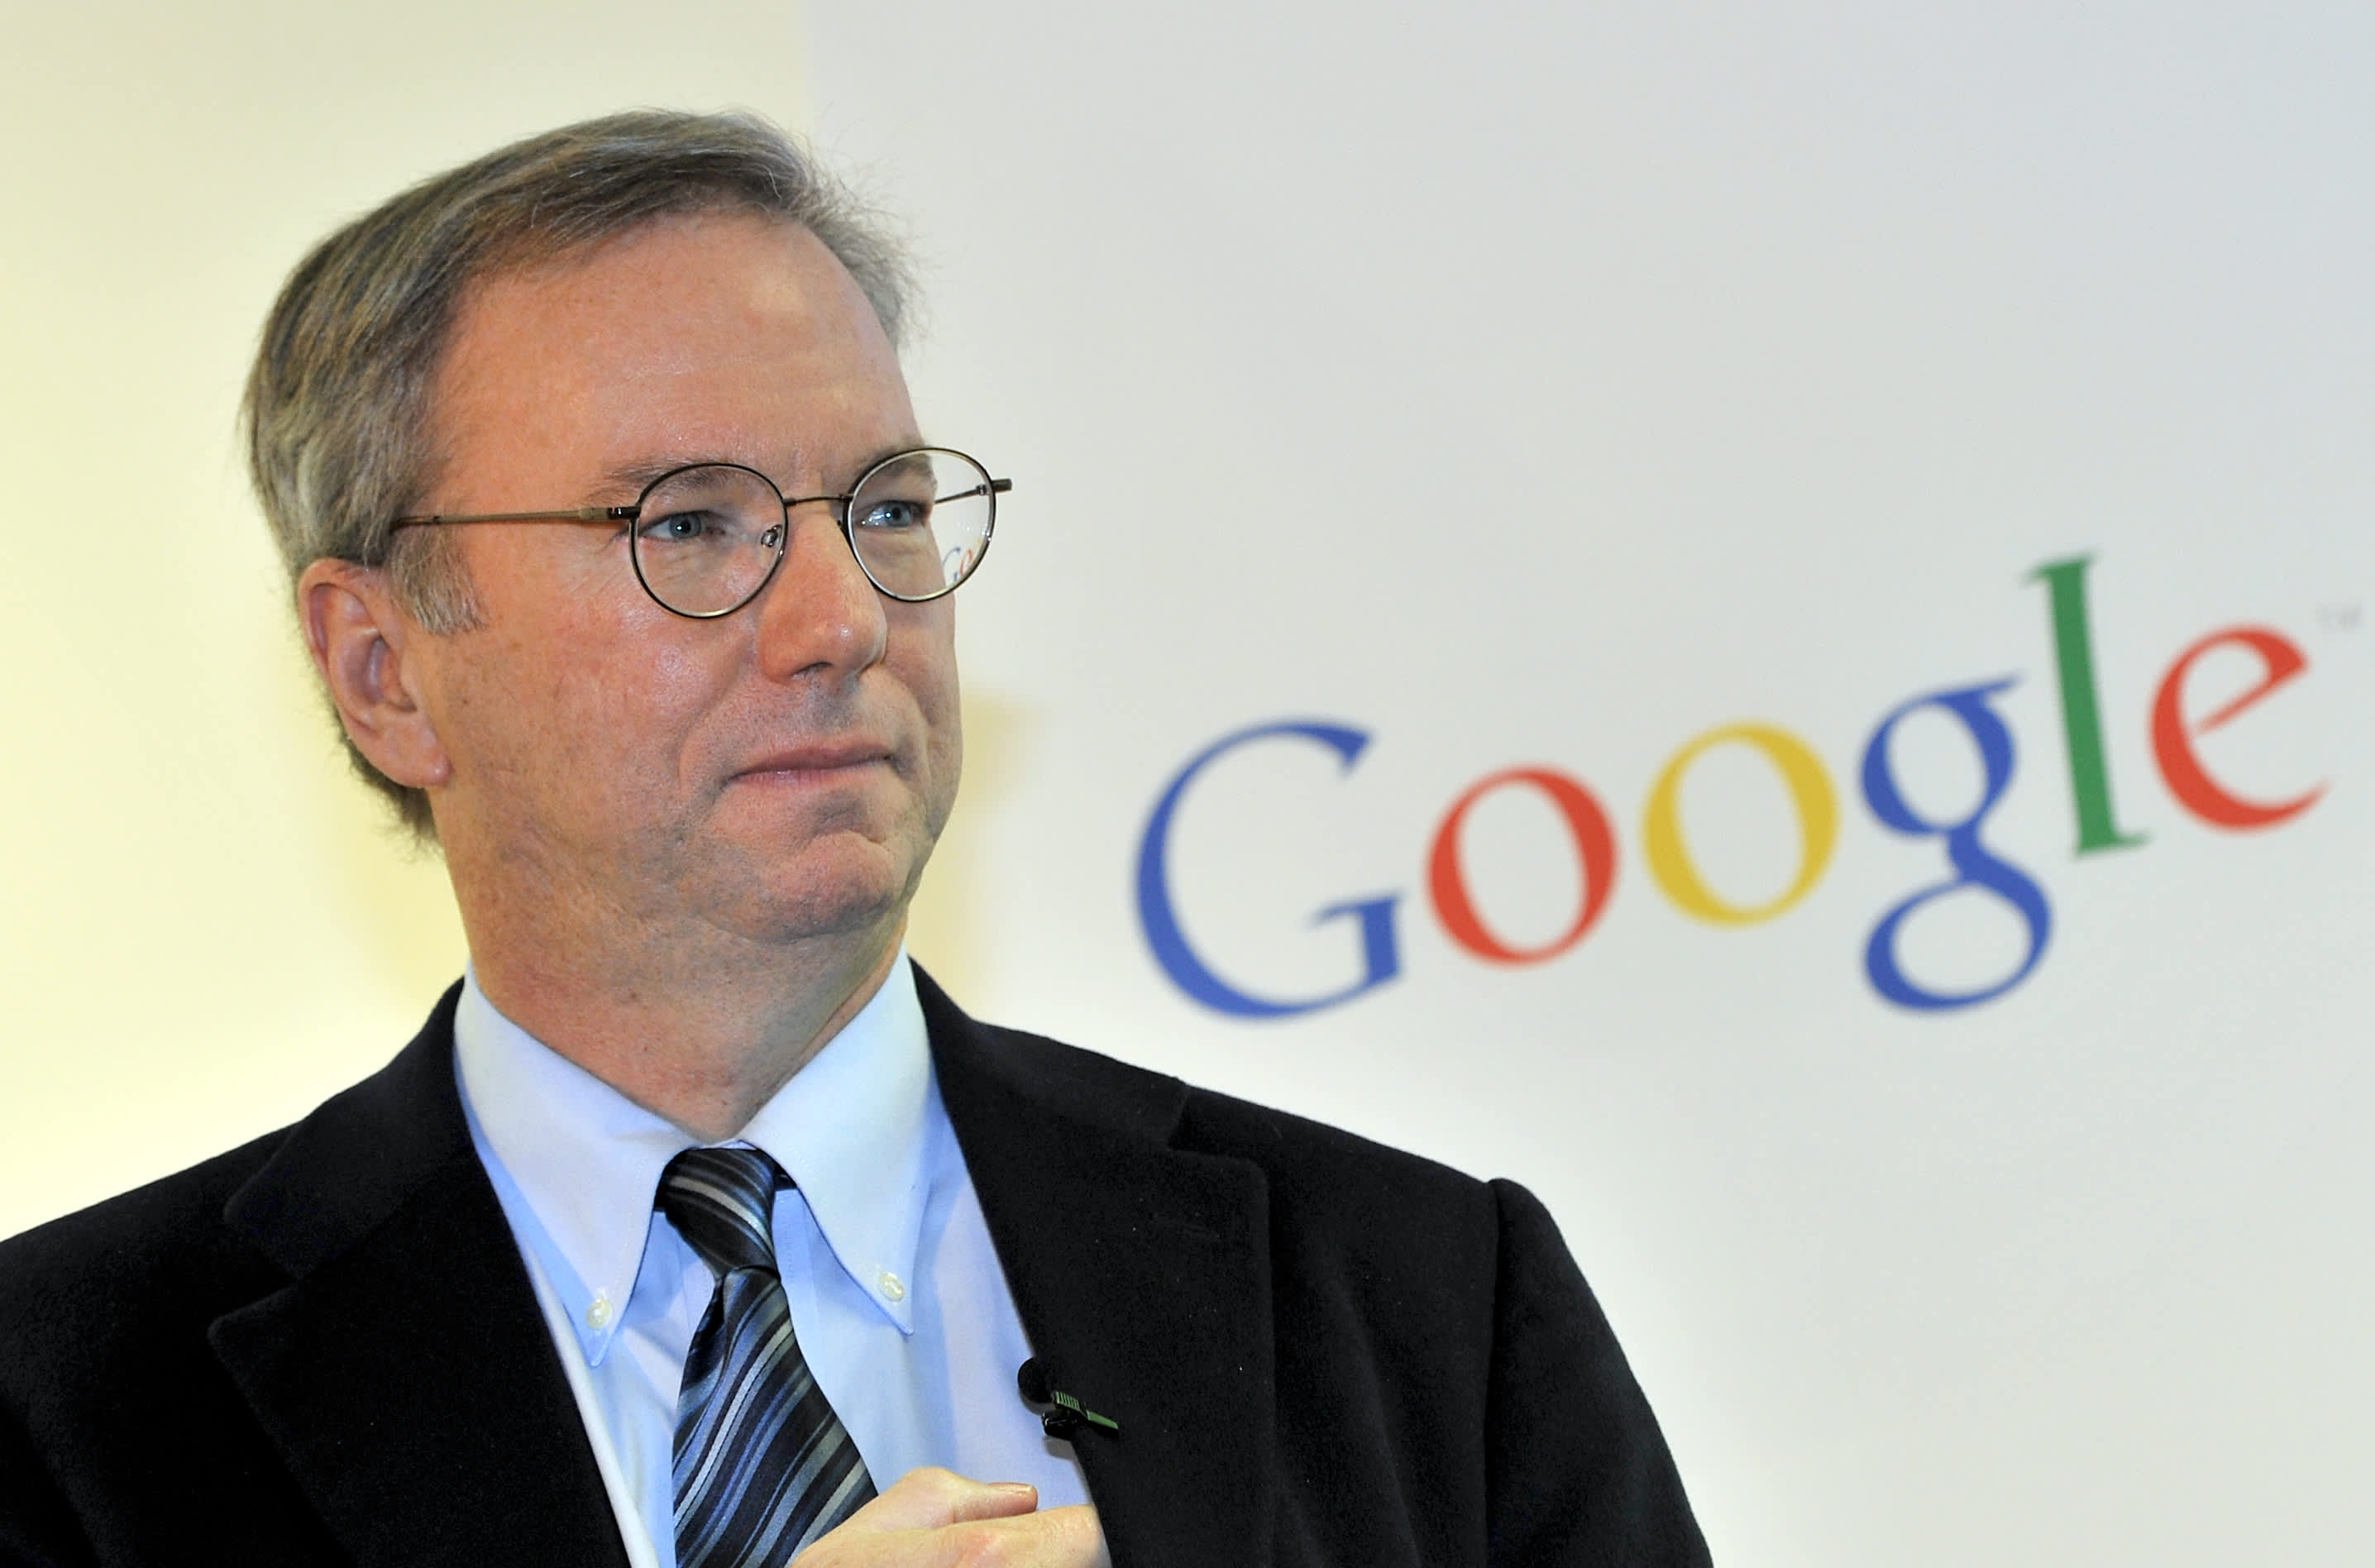 Ex-Google CEO warns artificial intelligence could be used to kill 